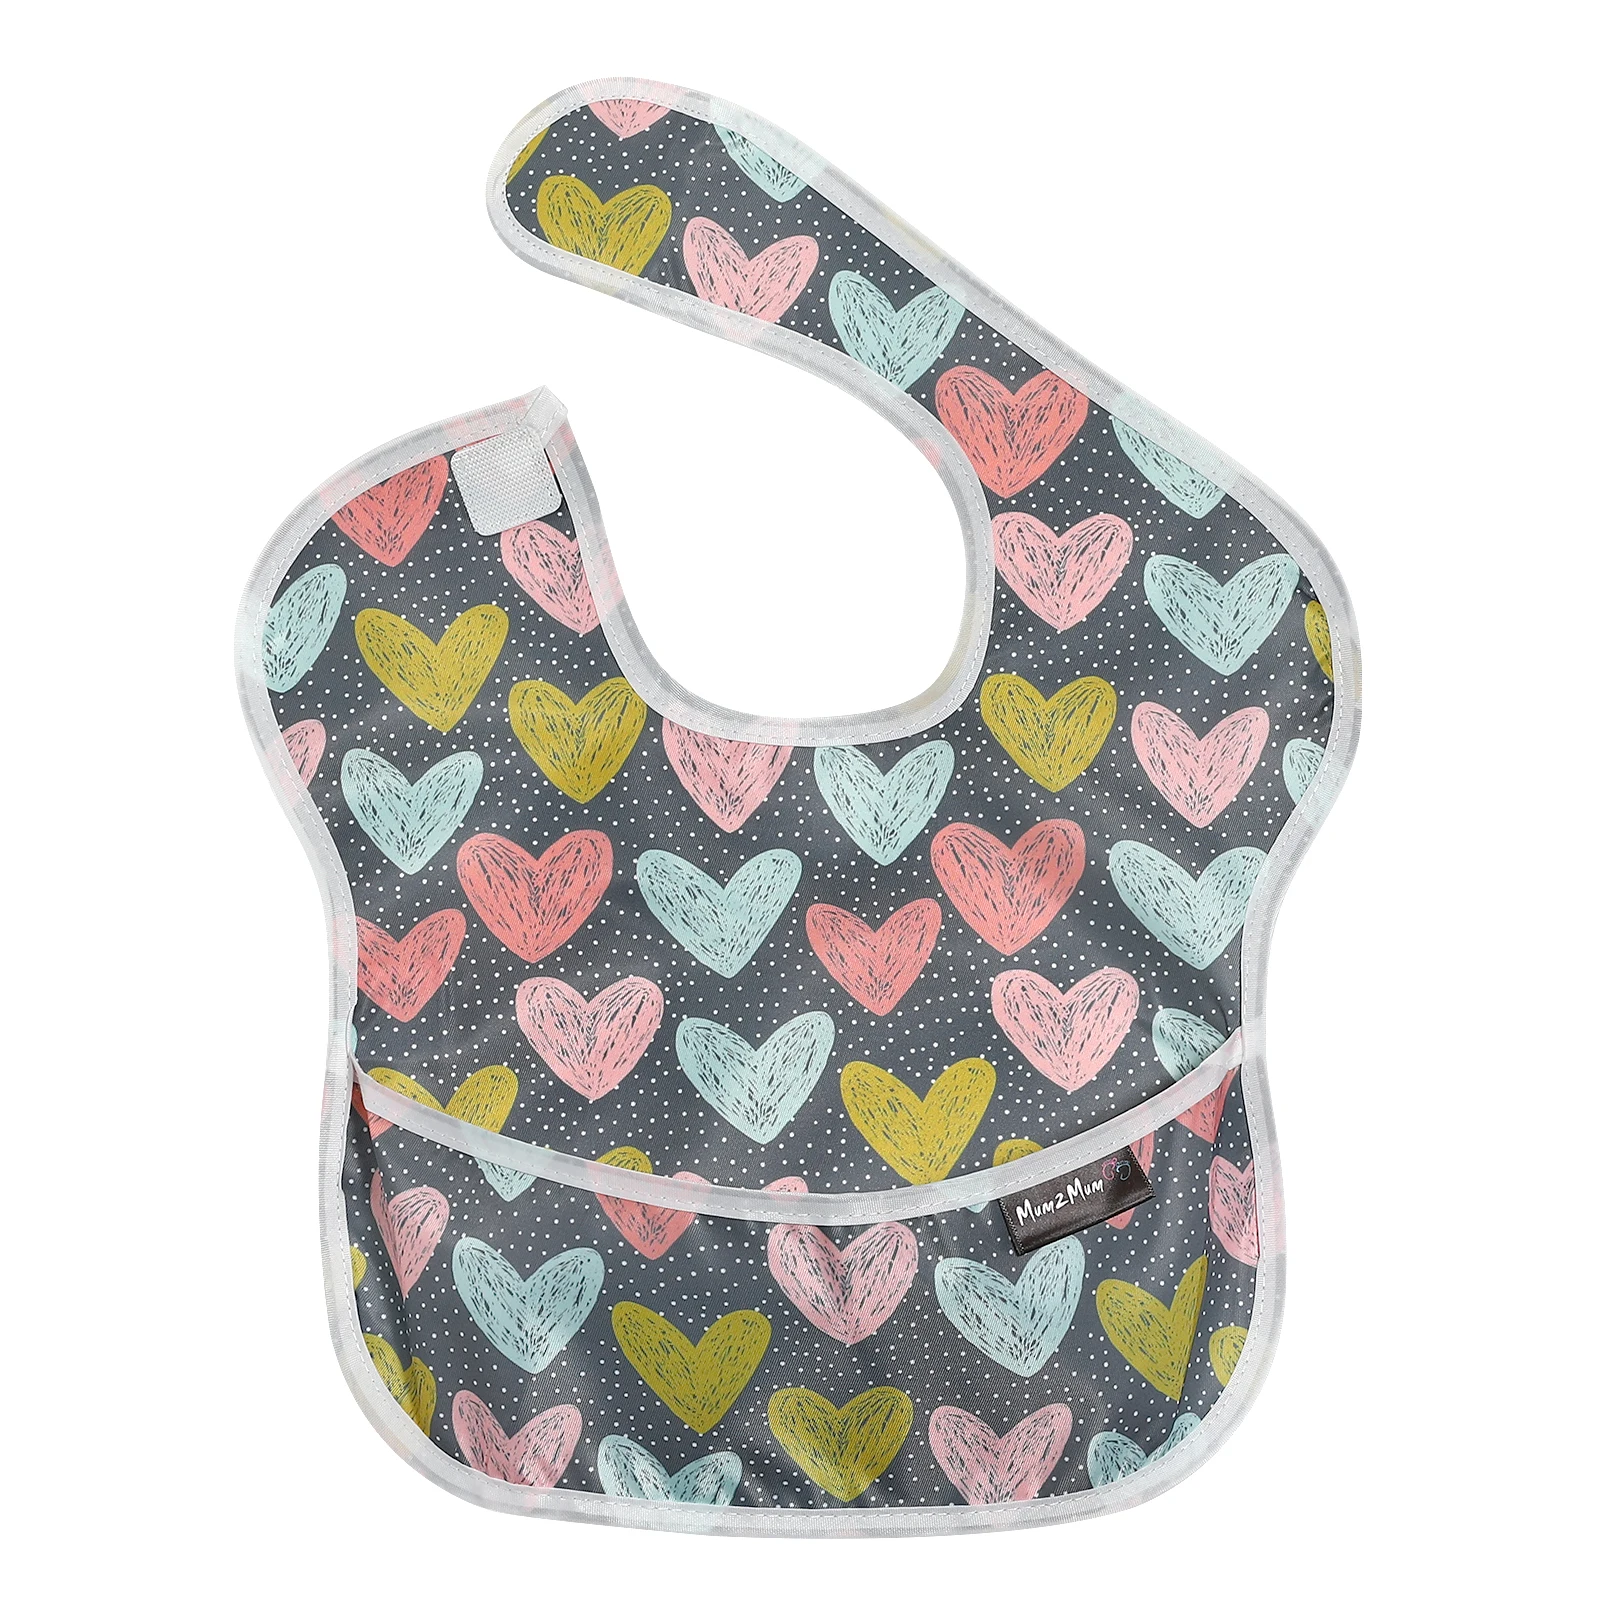 new born baby accessories	 Unisex Waterproof Baby Bibs 100% Polyester TPU Coating Feeding Bibs Washable Baby Bibs with Food Catcher for Babies crochet baby accessories Baby Accessories